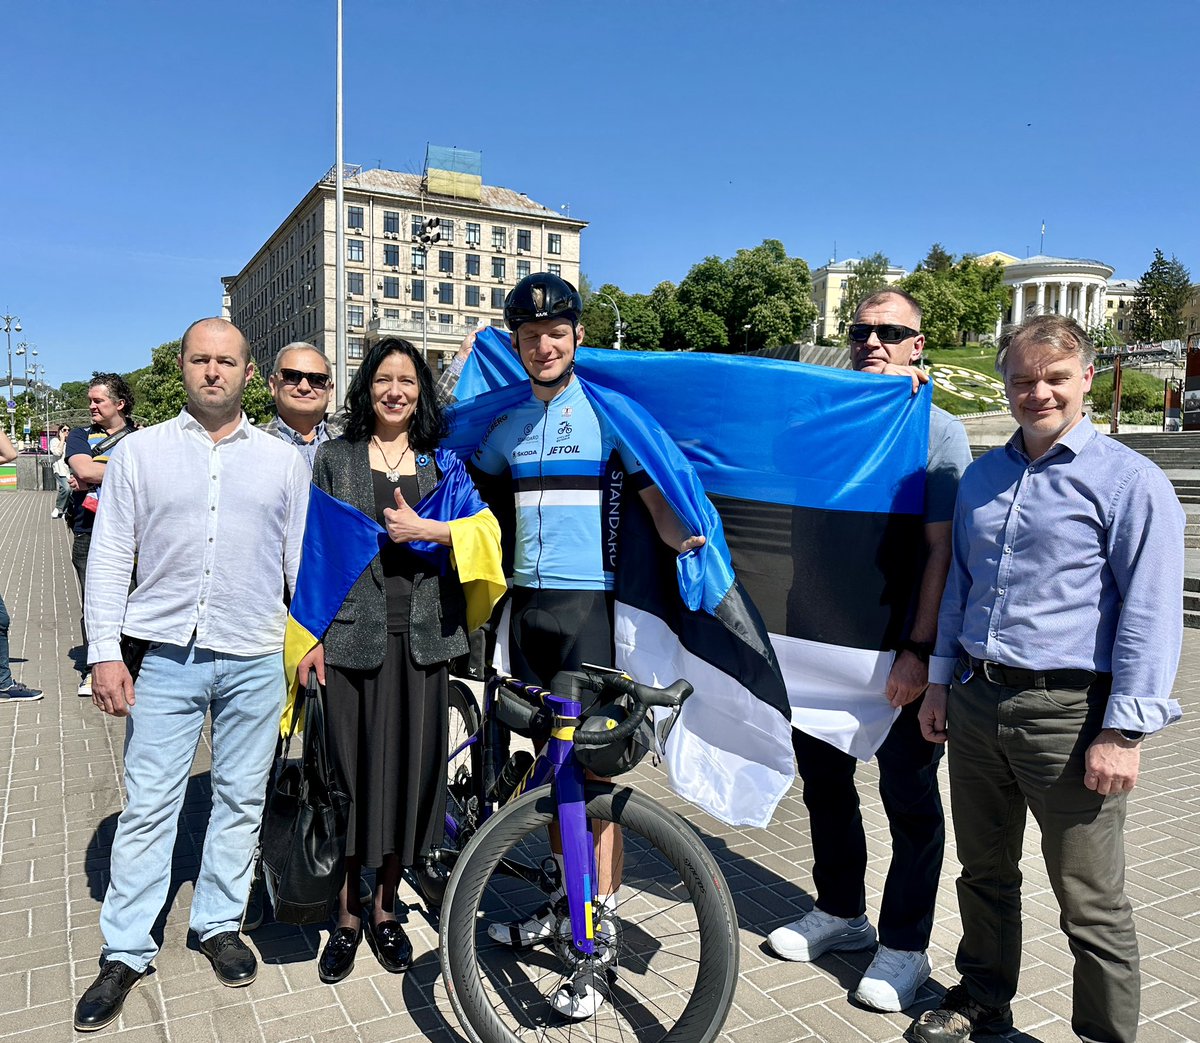 I did it! Rode my bike from 🇪🇪TLN to Kyiv🇺🇦 to show that the war is ongoing just a bike ride away and to show support to defenders. Let’s keep focus on helping Ukraine win this war and beat terrorist Russia!